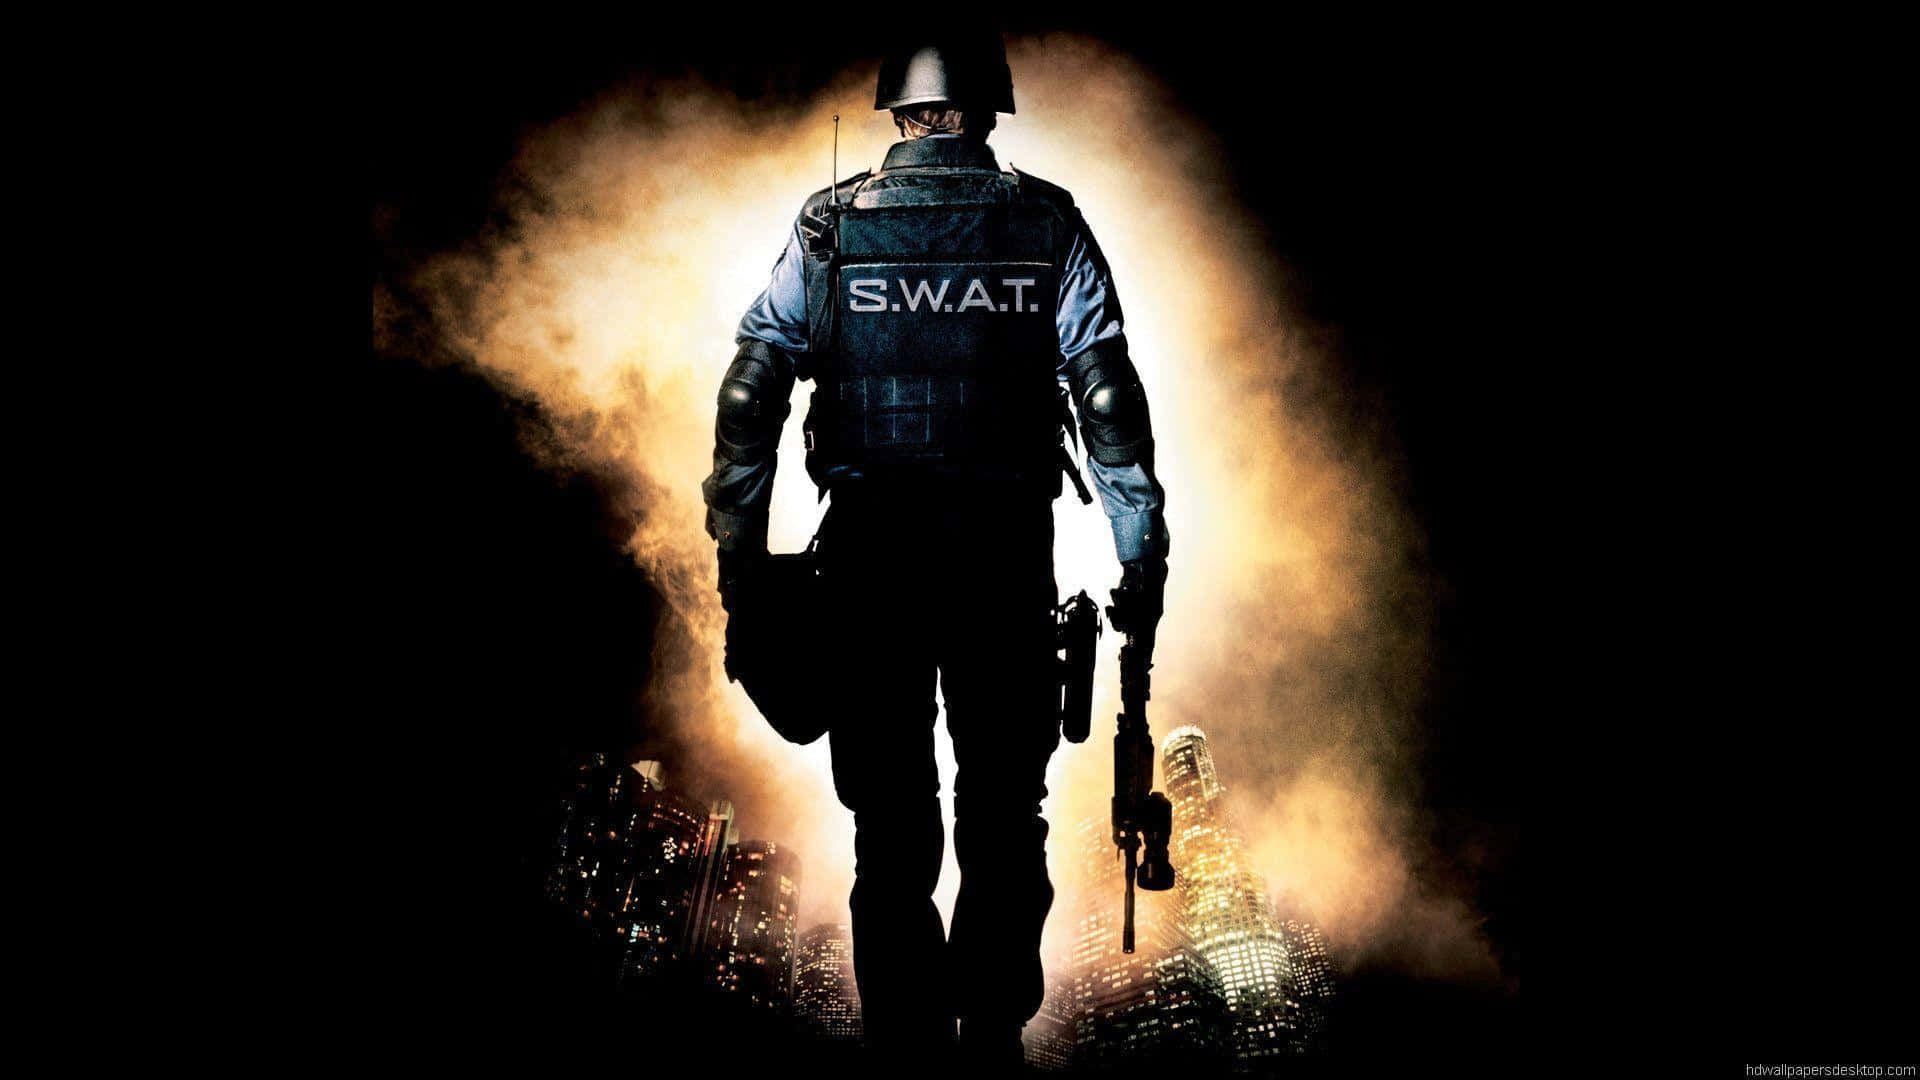 Elite Swat Officer Catching his Breath in Time of Crisis Wallpaper